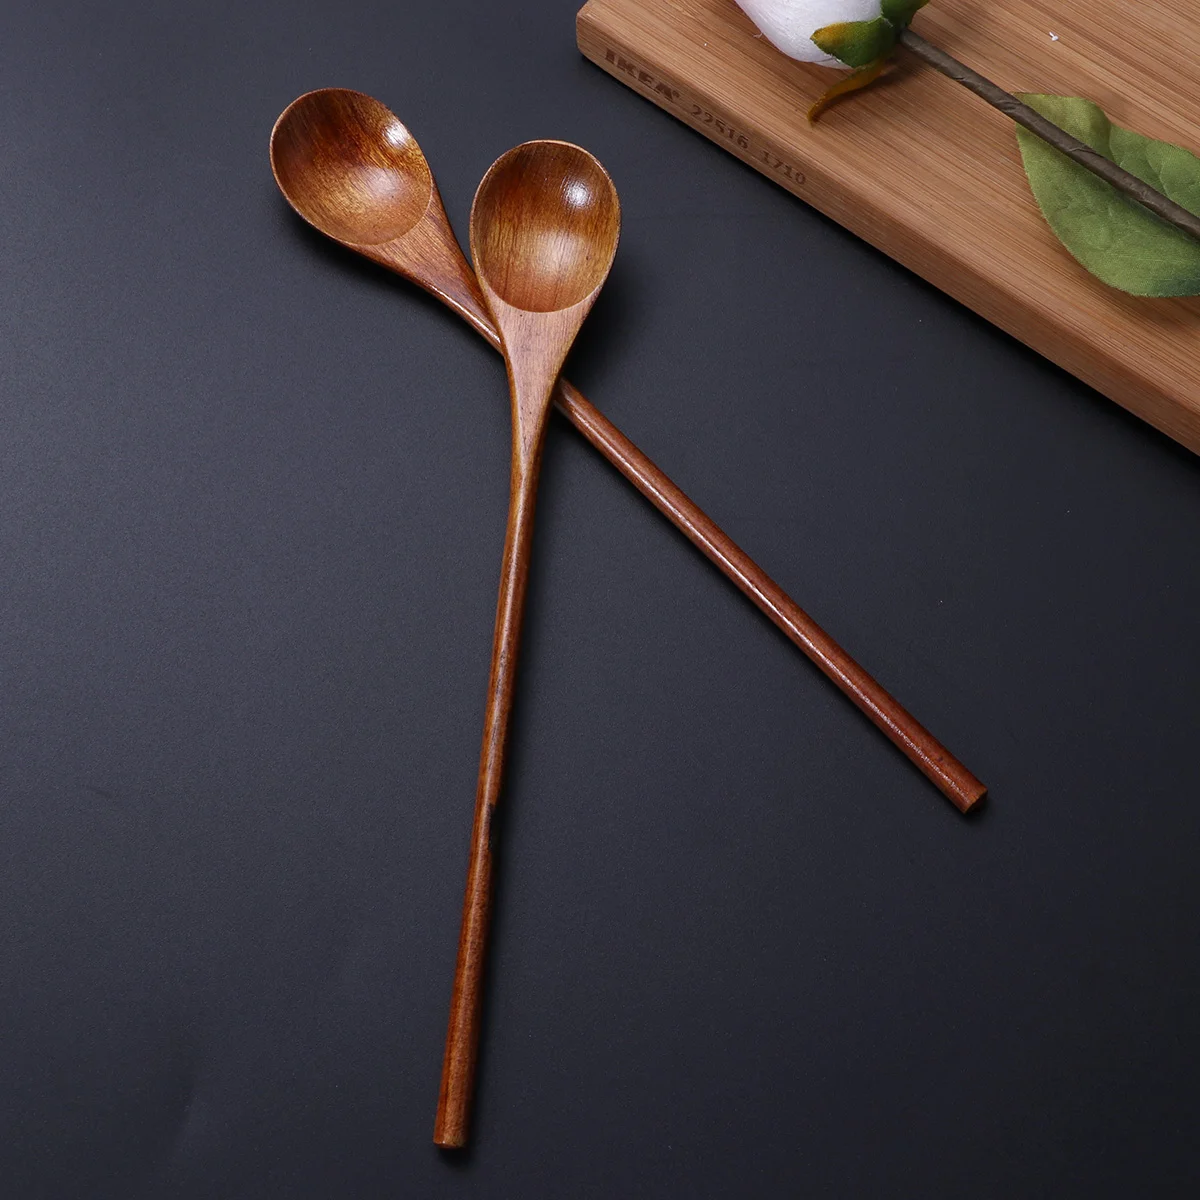 

Spoon Spoons Wooden Wood Kitchen Mixing Mini Soup Stirring Cooking Set Candy Honey Long Handle Eating Baby Japanese Serving